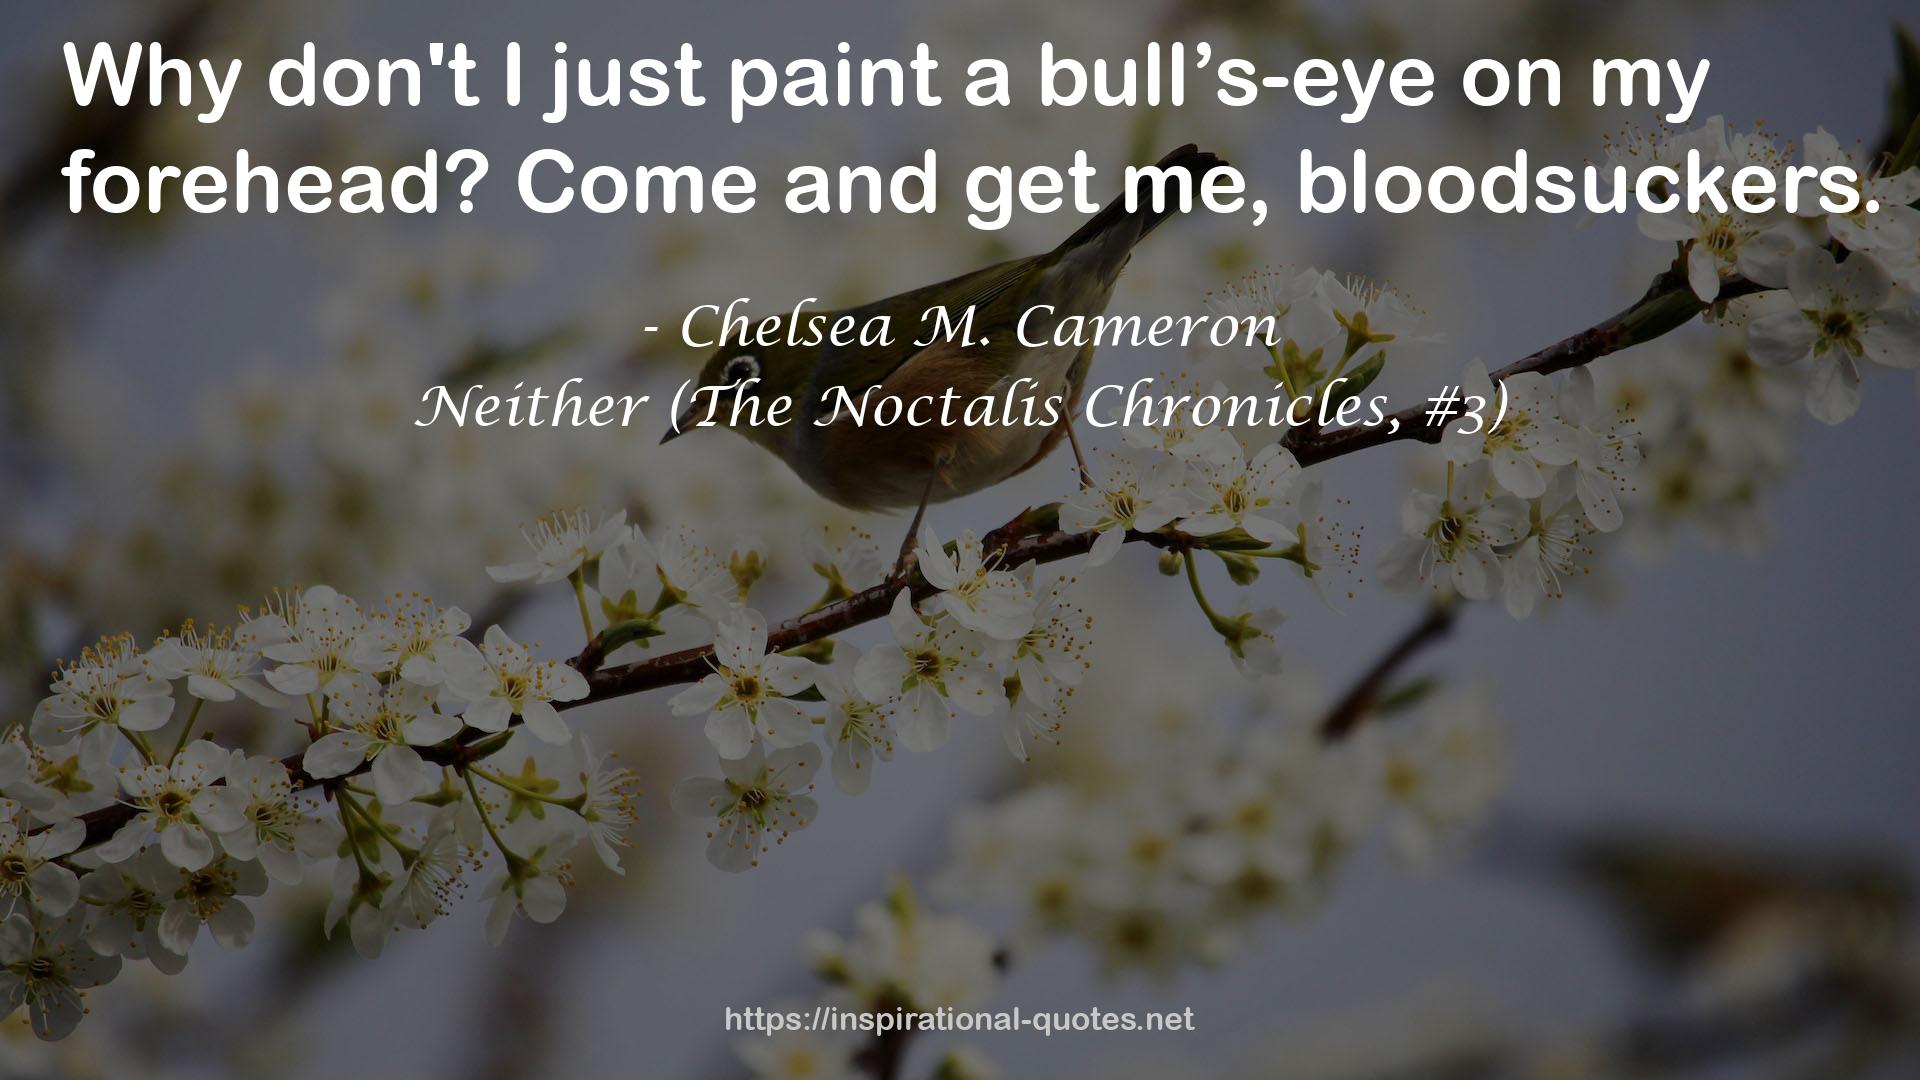 Neither (The Noctalis Chronicles, #3) QUOTES